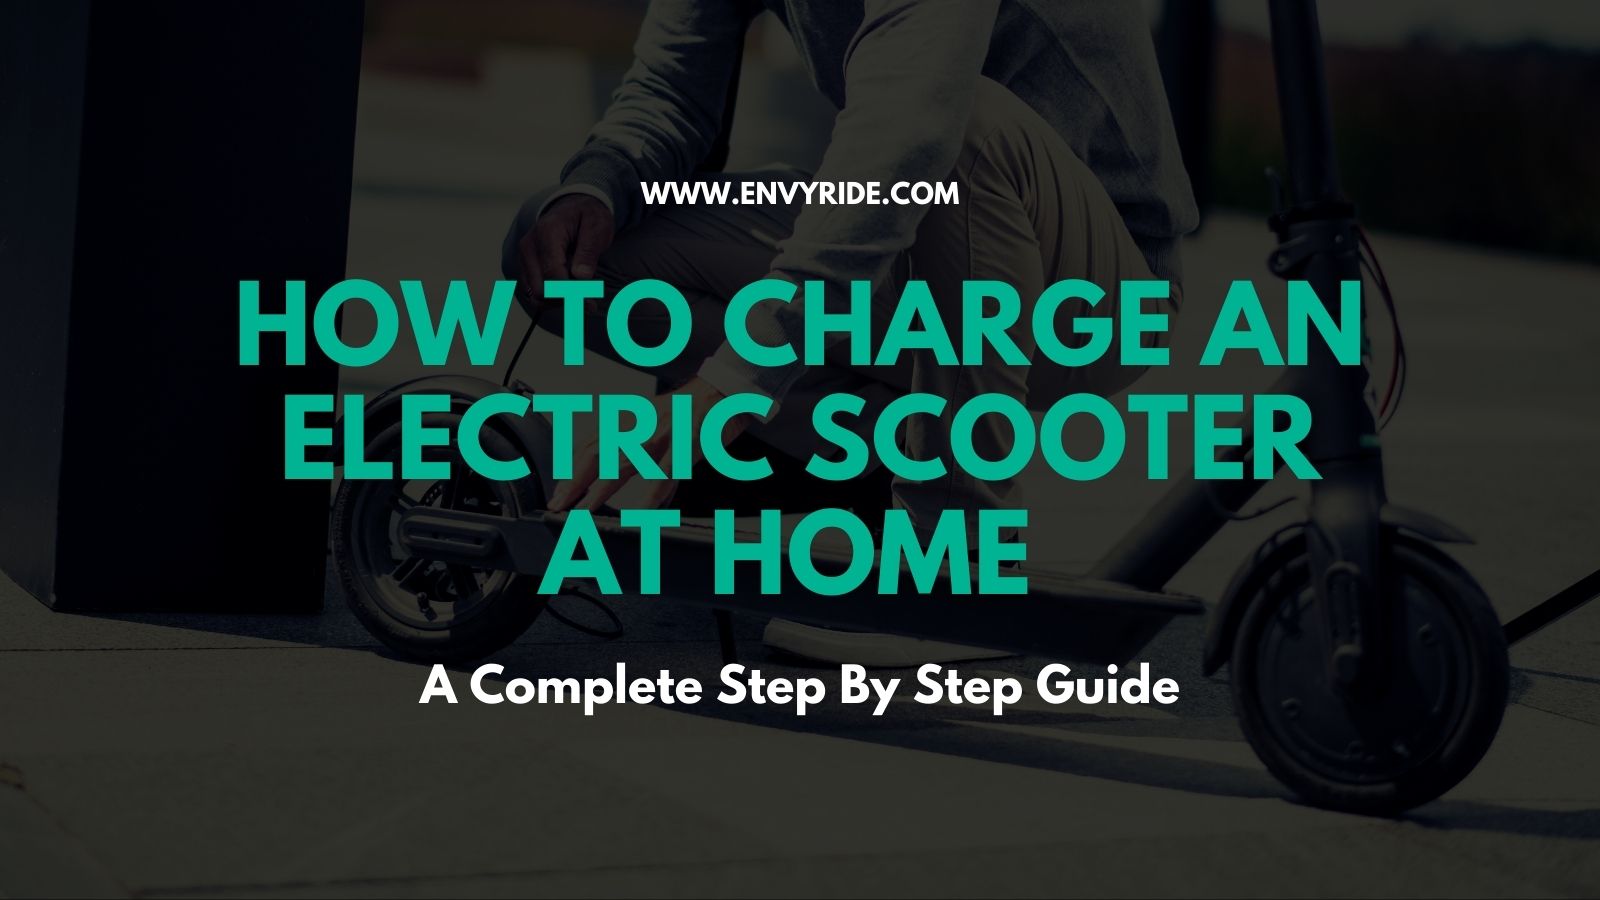 How To Charge An Electric Scooter At Home